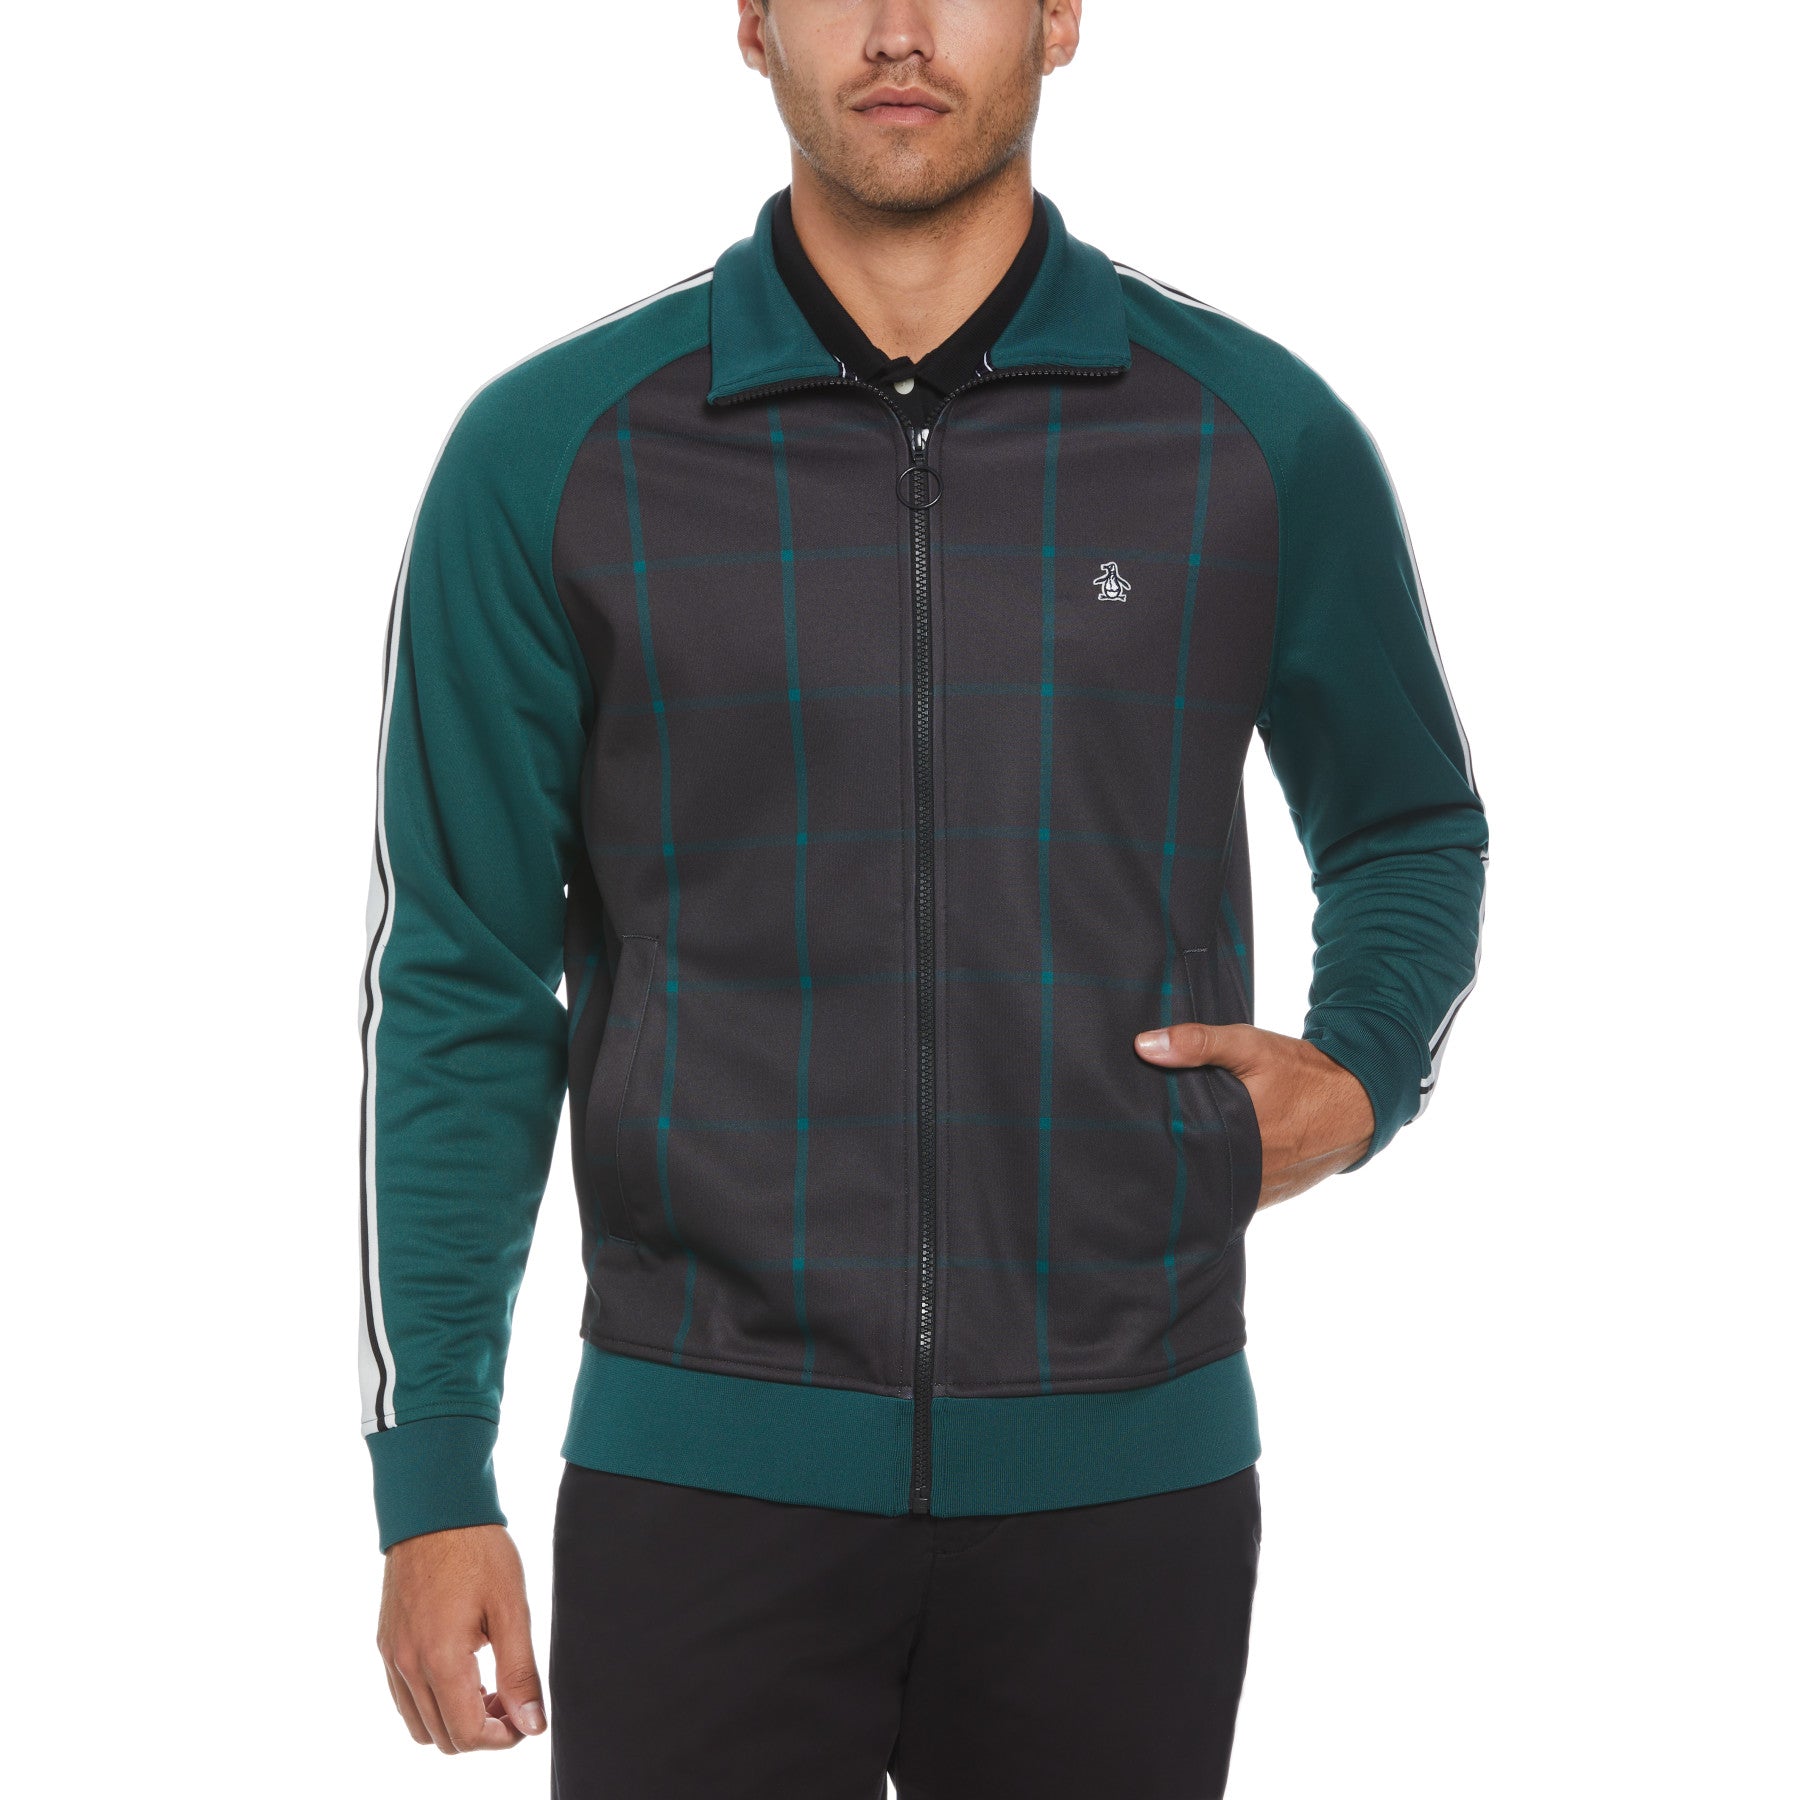 View Solid Tape Plaid Track Jacket In June Bug information